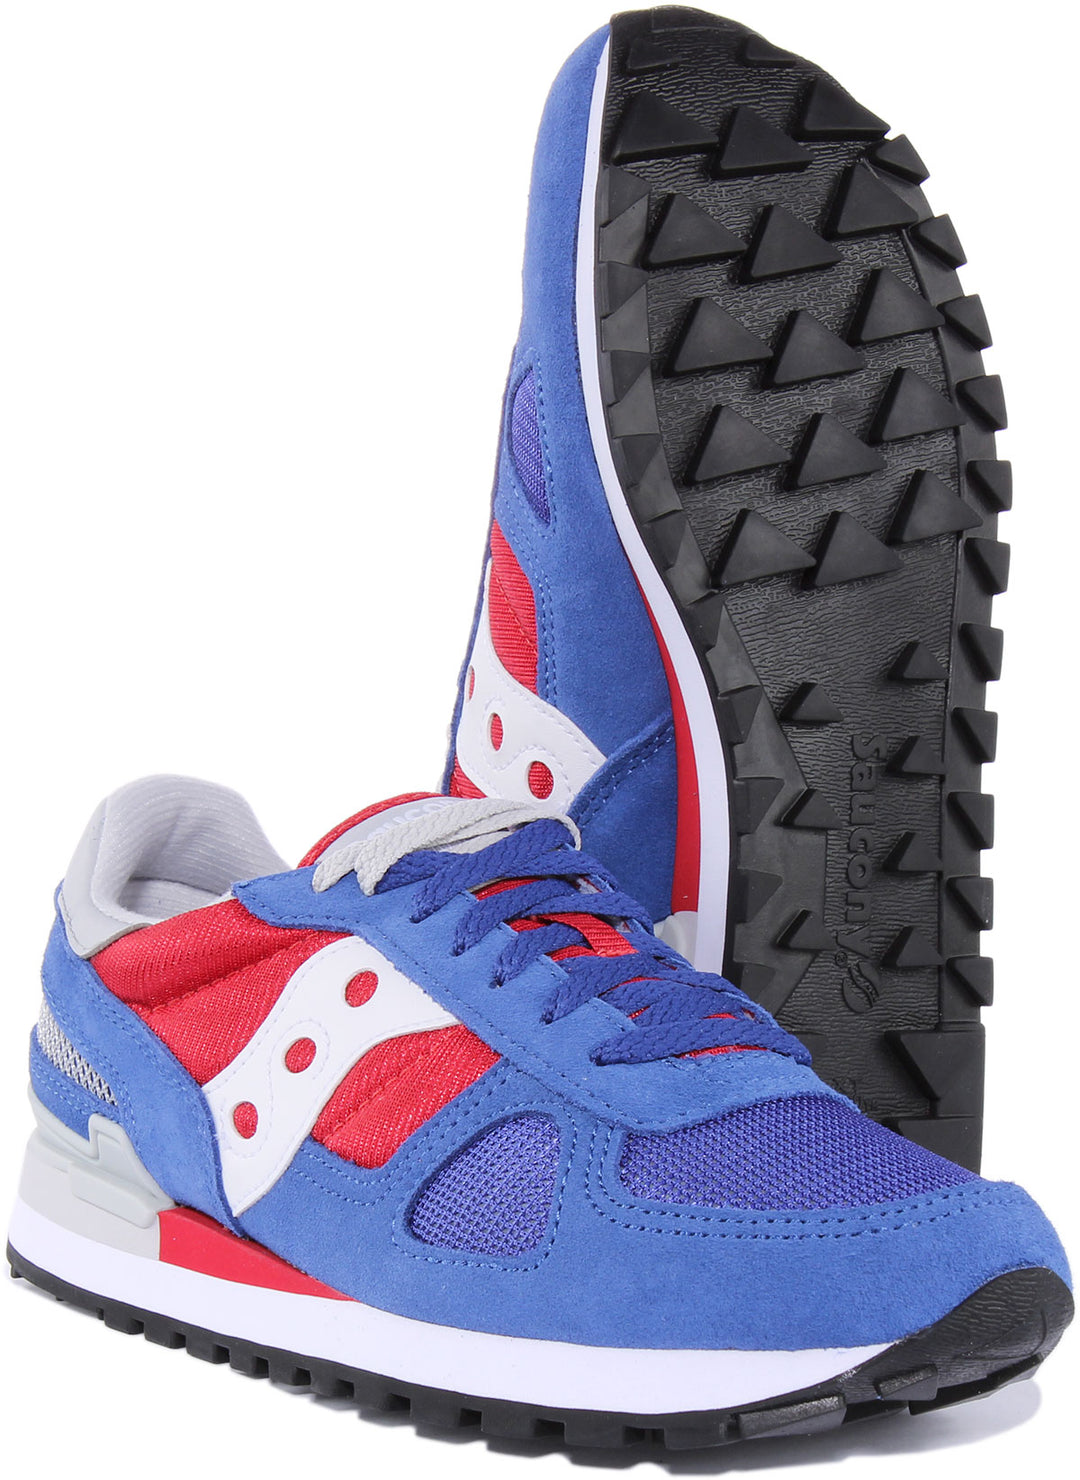 Saucony Shadow Original In Blue Red For Men